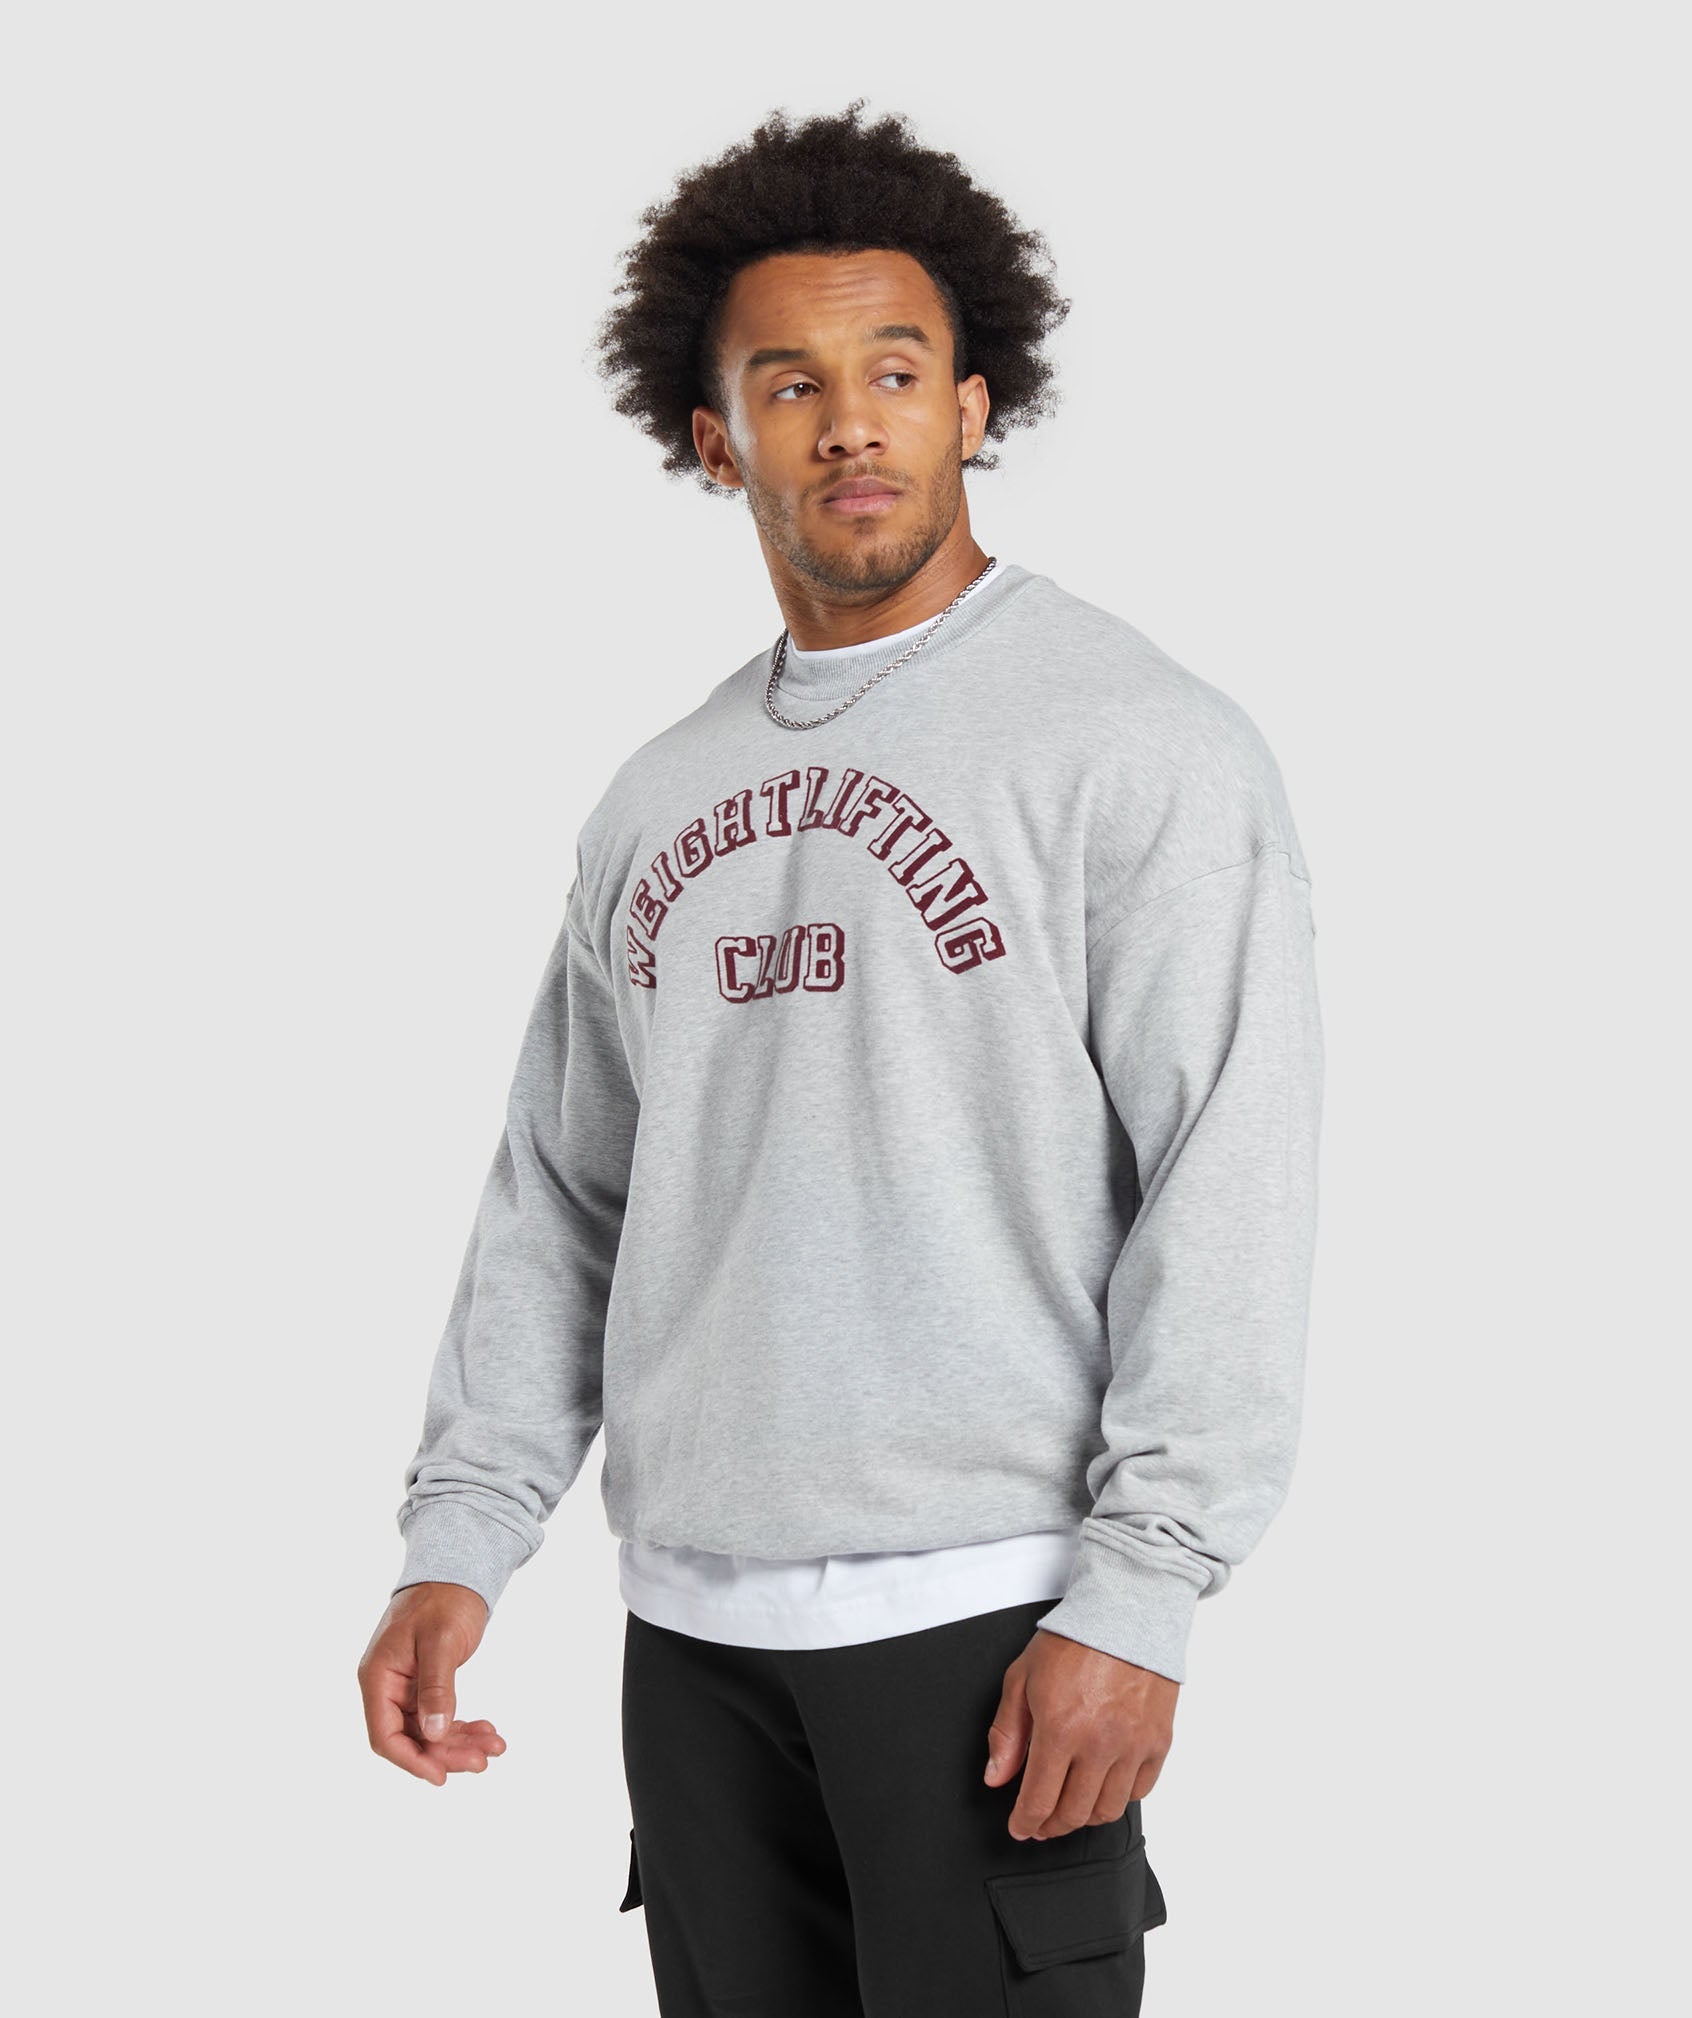 Weightlifting Club Crew in Light Grey Core Marl - view 3